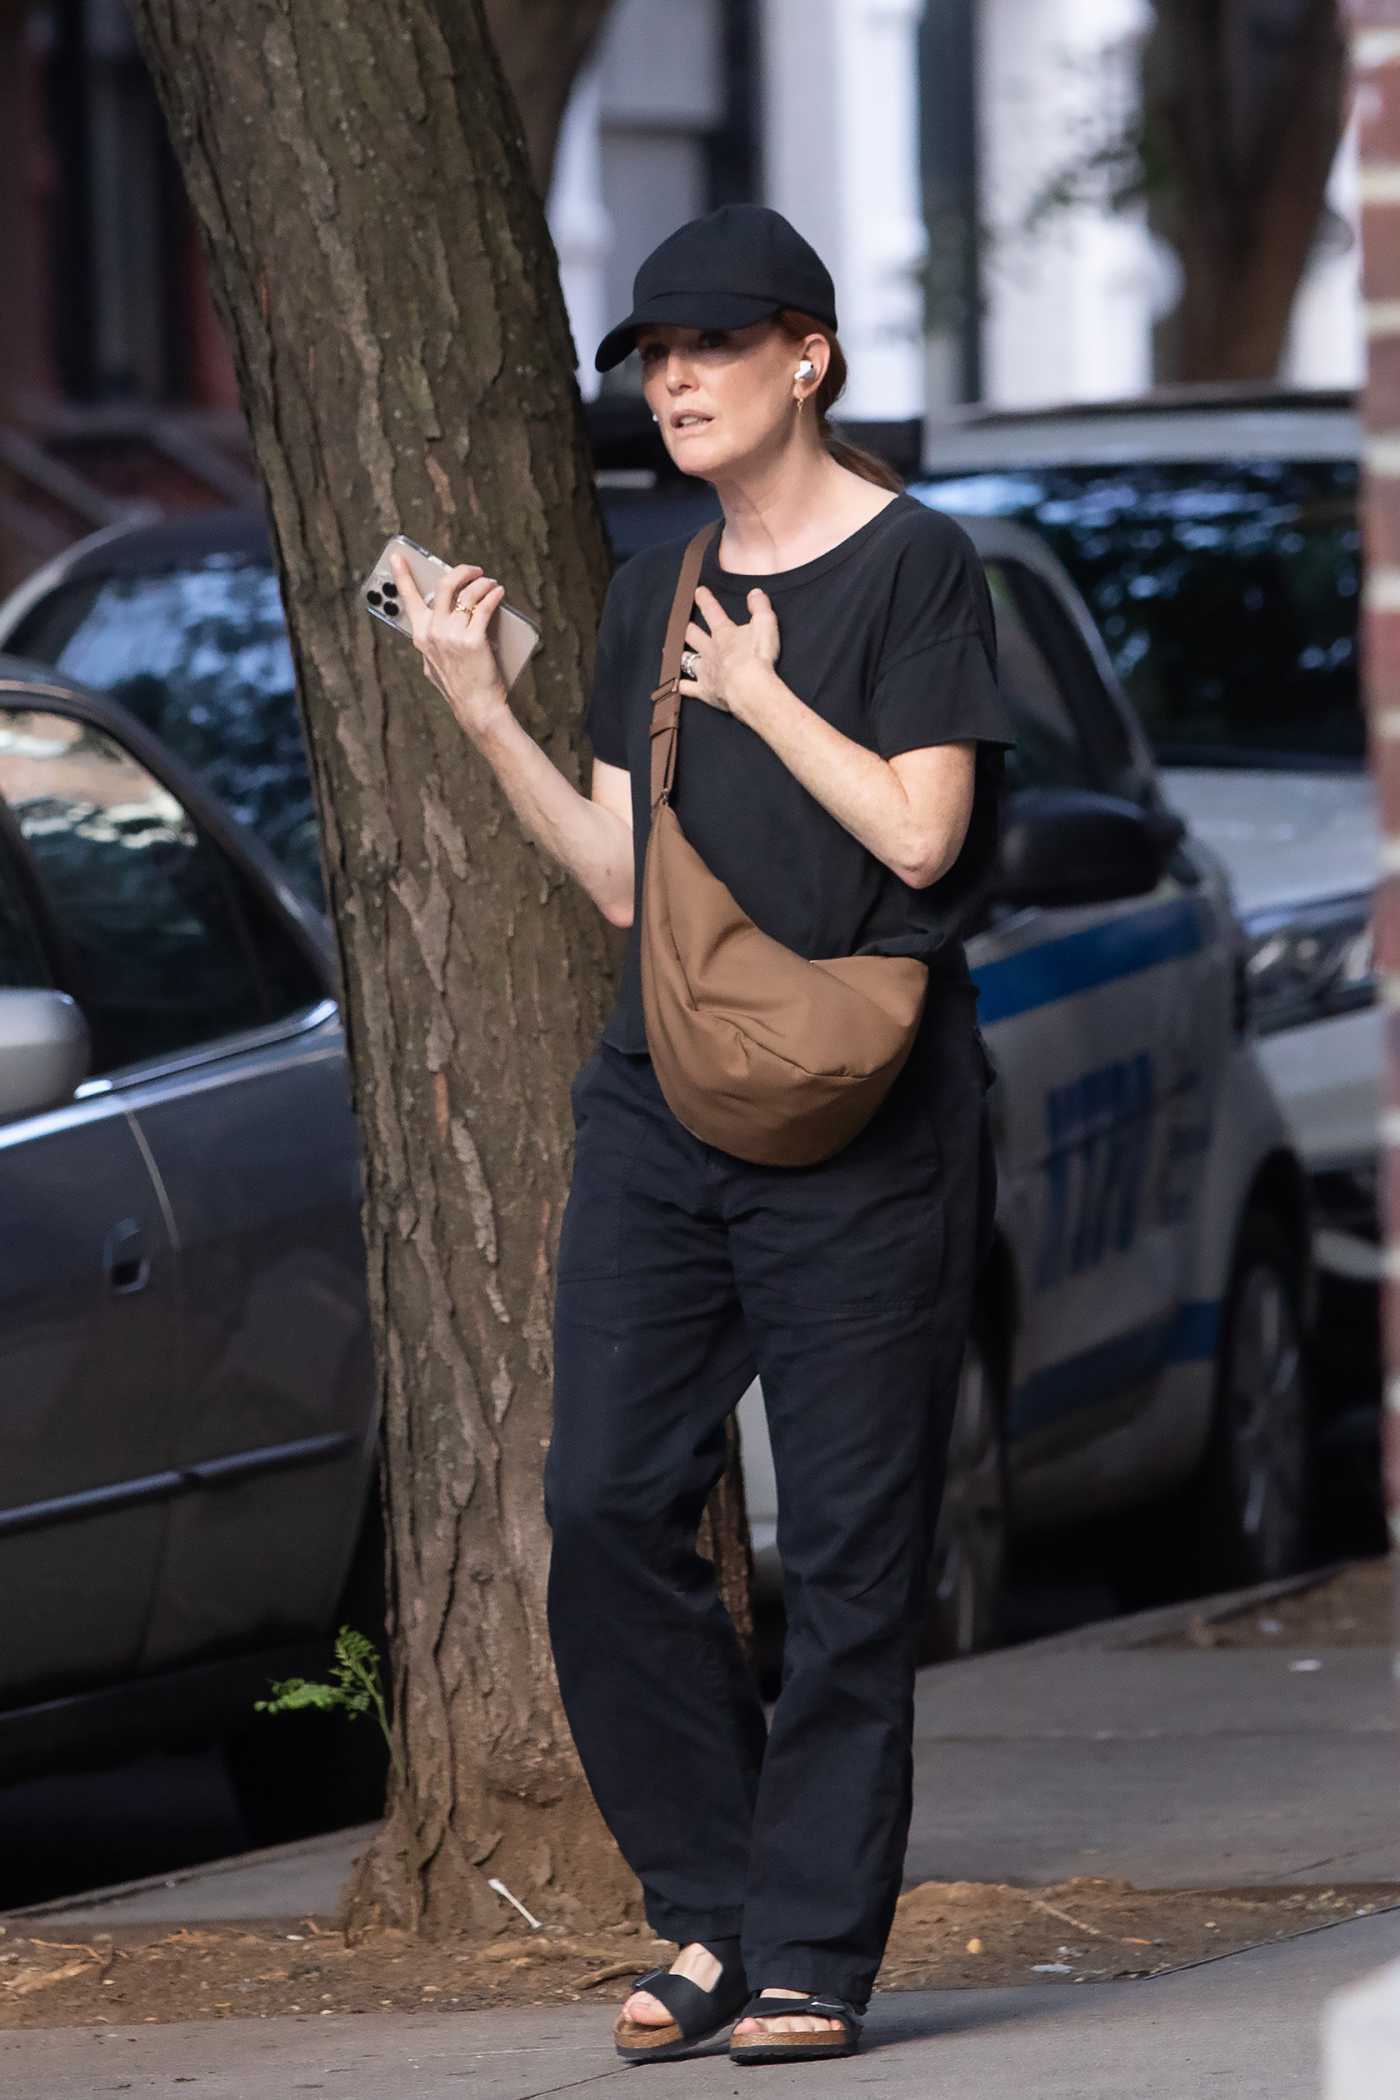 Julianne Moore in a Black Cap Was Seen Out in the West Village in NYC 08/24/2022